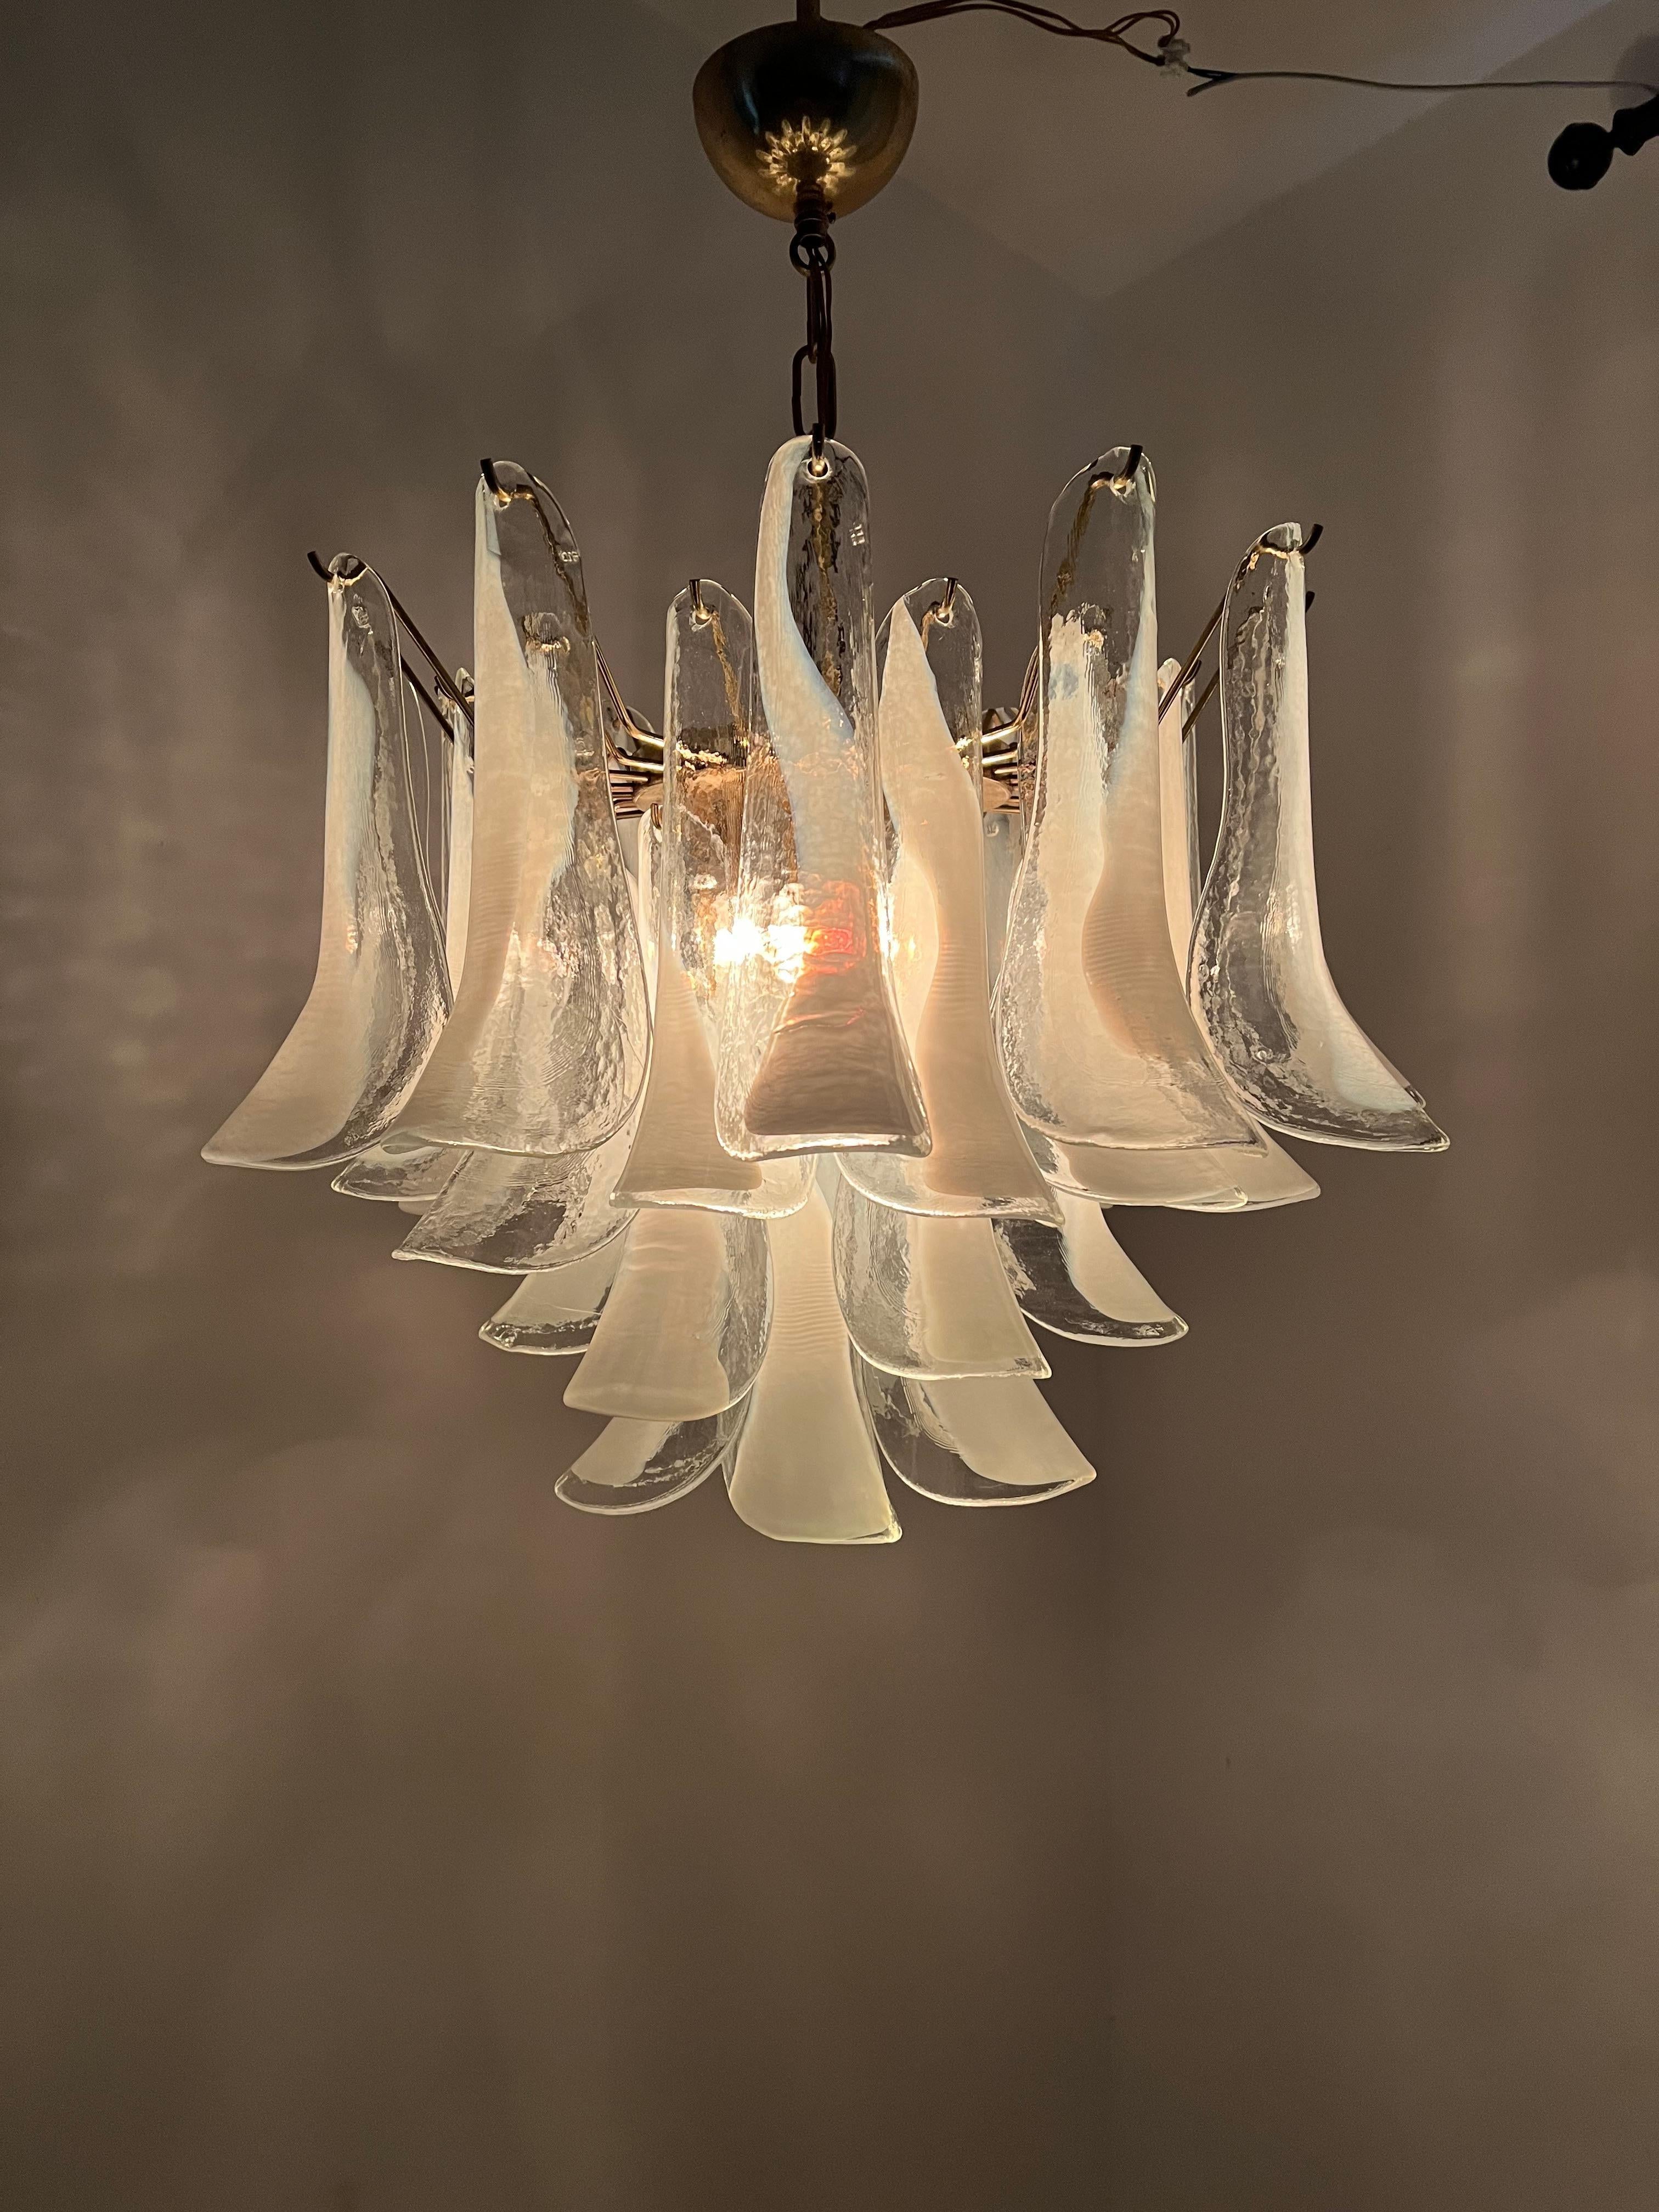 Two Identical Signed Mid-Century Modern Chandeliers, La Murrina in Murano Glass For Sale 6